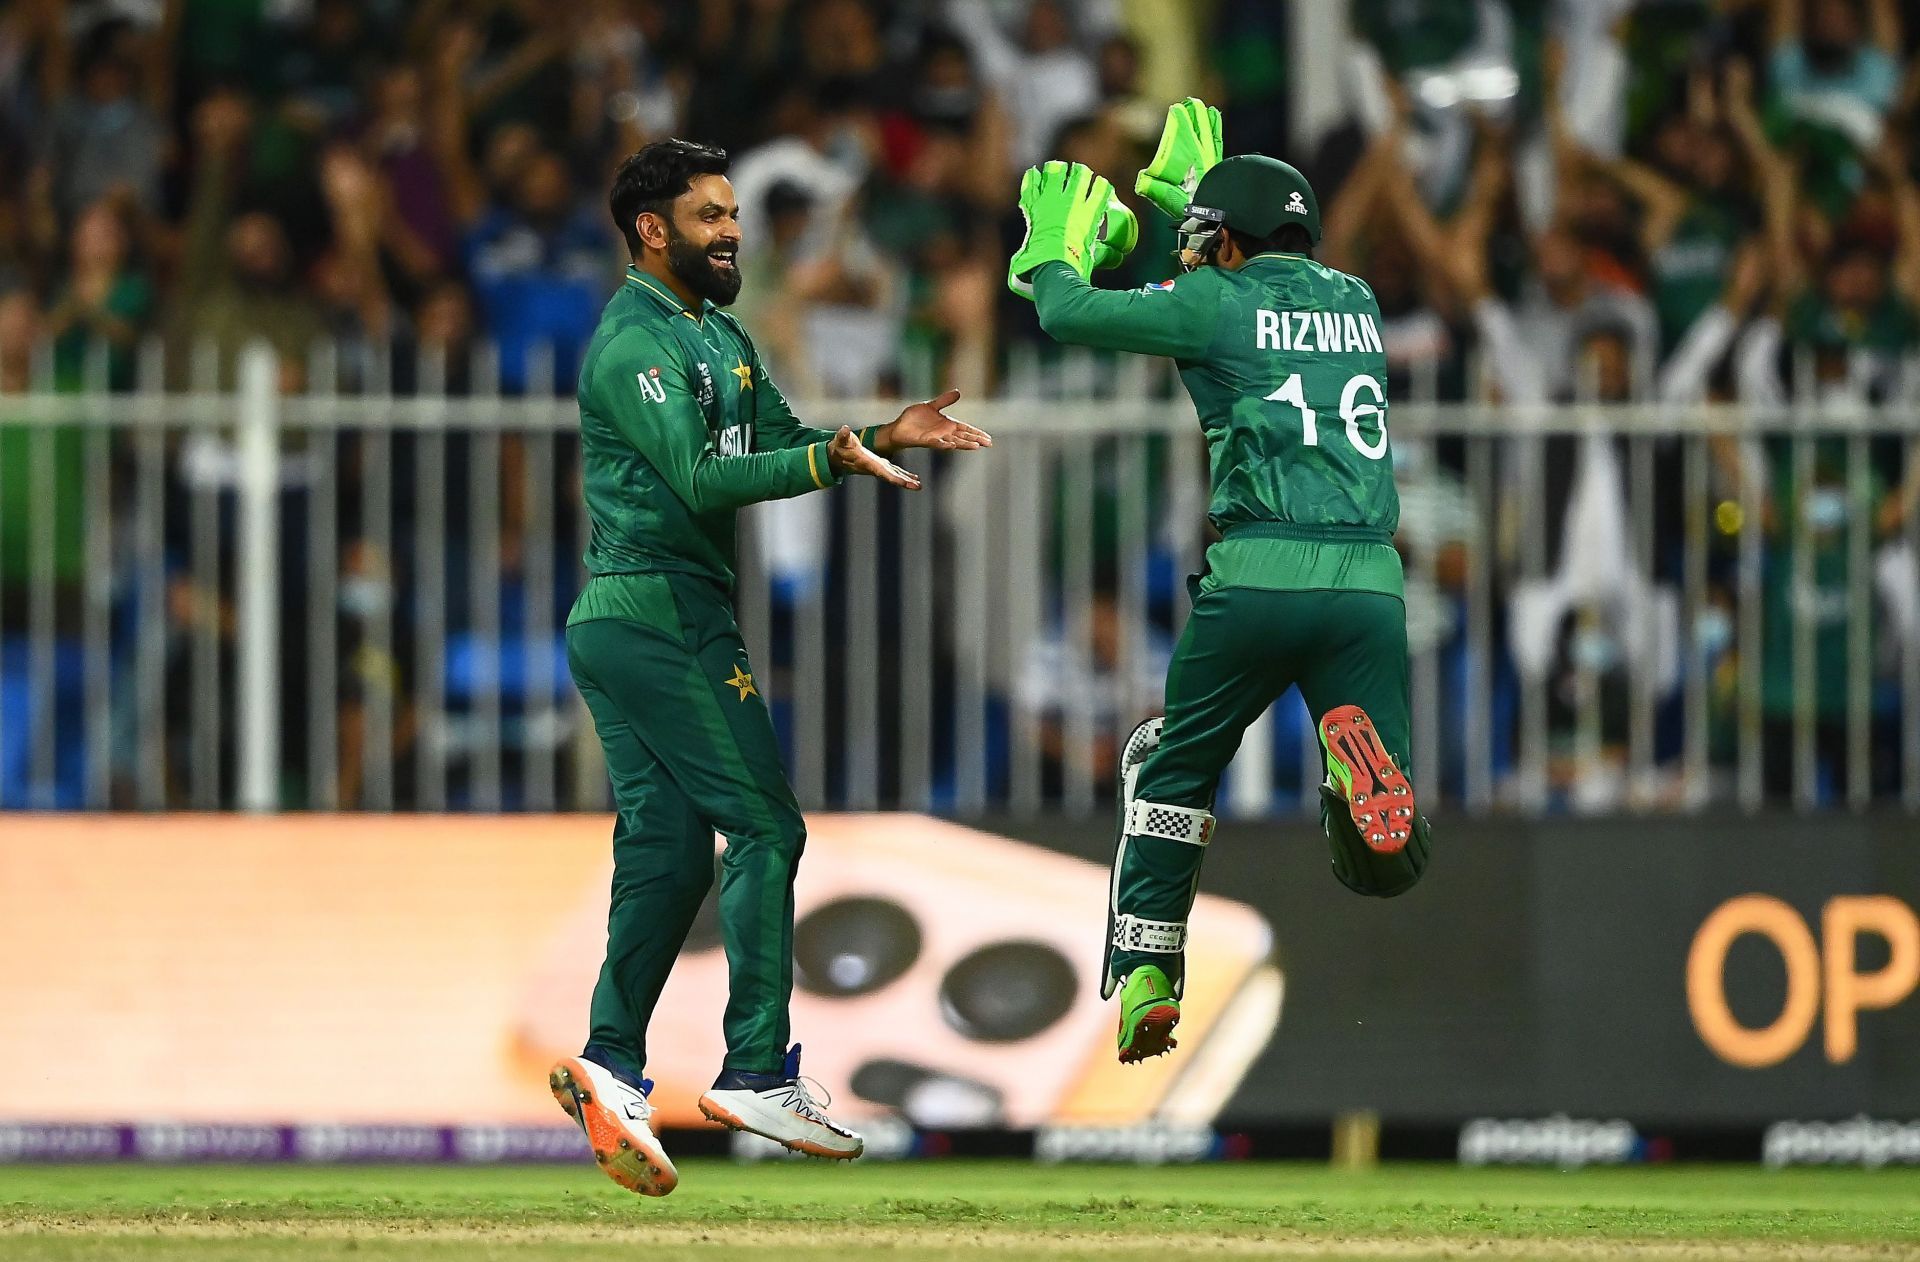 Mohammad Hafeez is not the oldest player in ICC T20 World Cup 2021